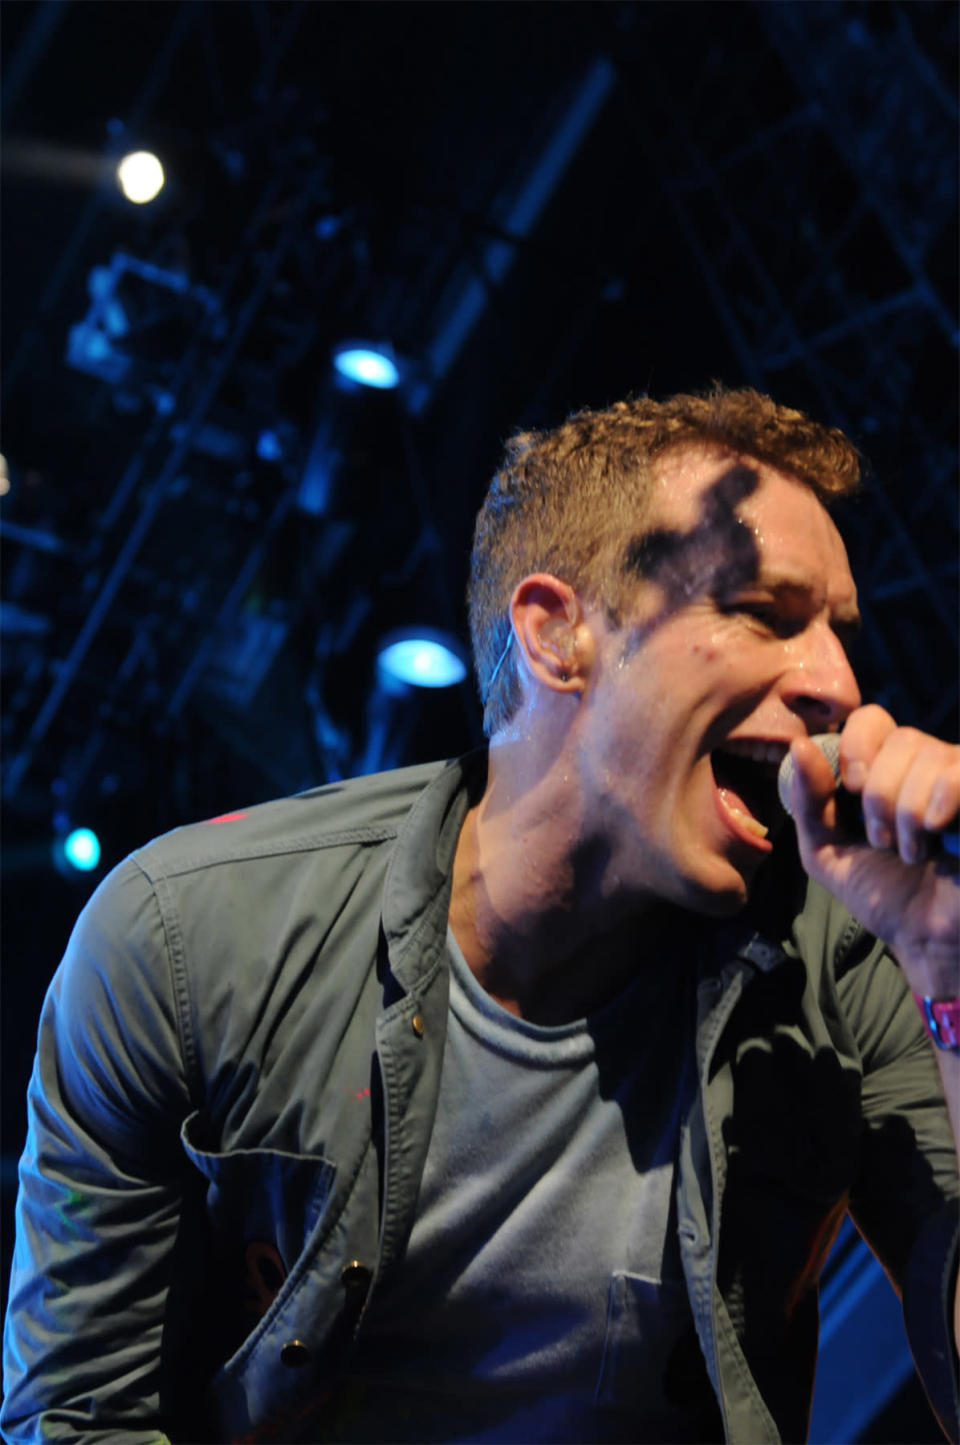 Chris Martin of the British band Coldplay, performs on December 31, 2011 in Abu Dhabi. The concert was a sold out event that helped to ring in 2012. Photograph: Peter Harrison/Yahoo! Maktoob